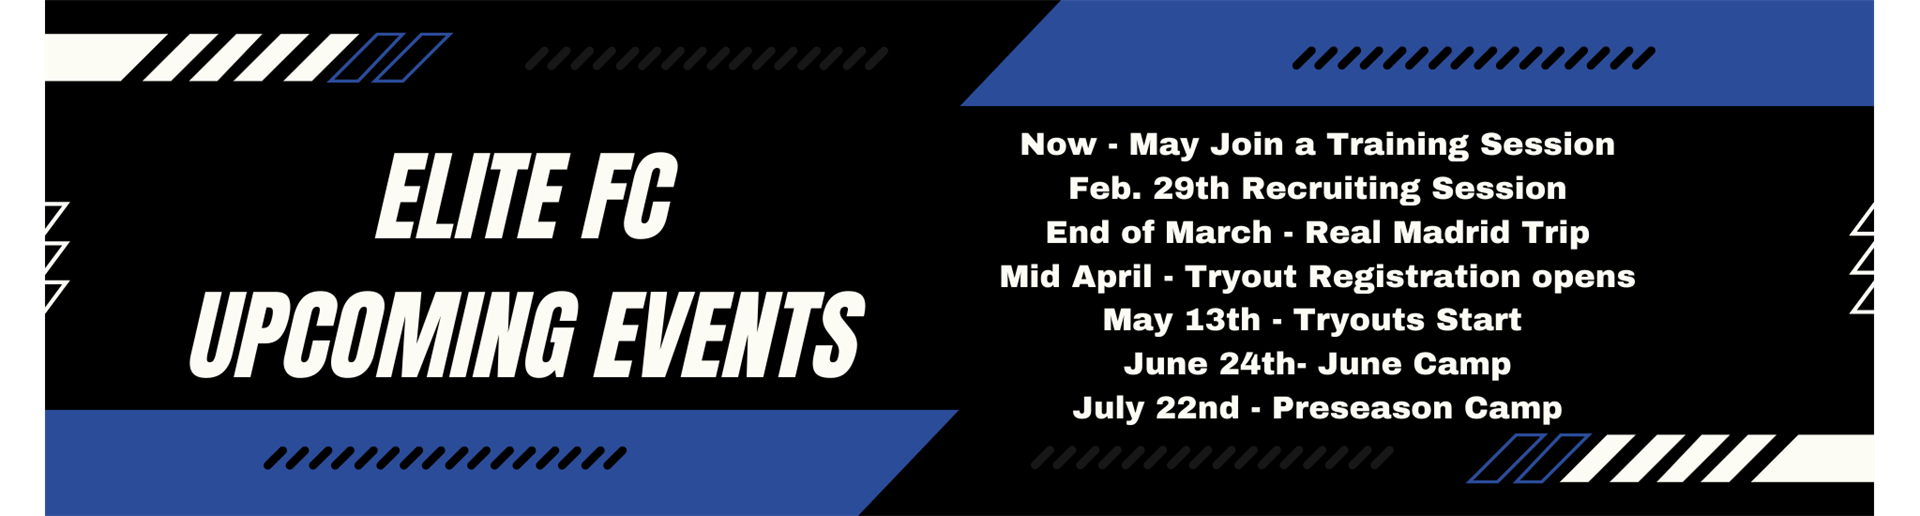 Elite FC Upcoming Events